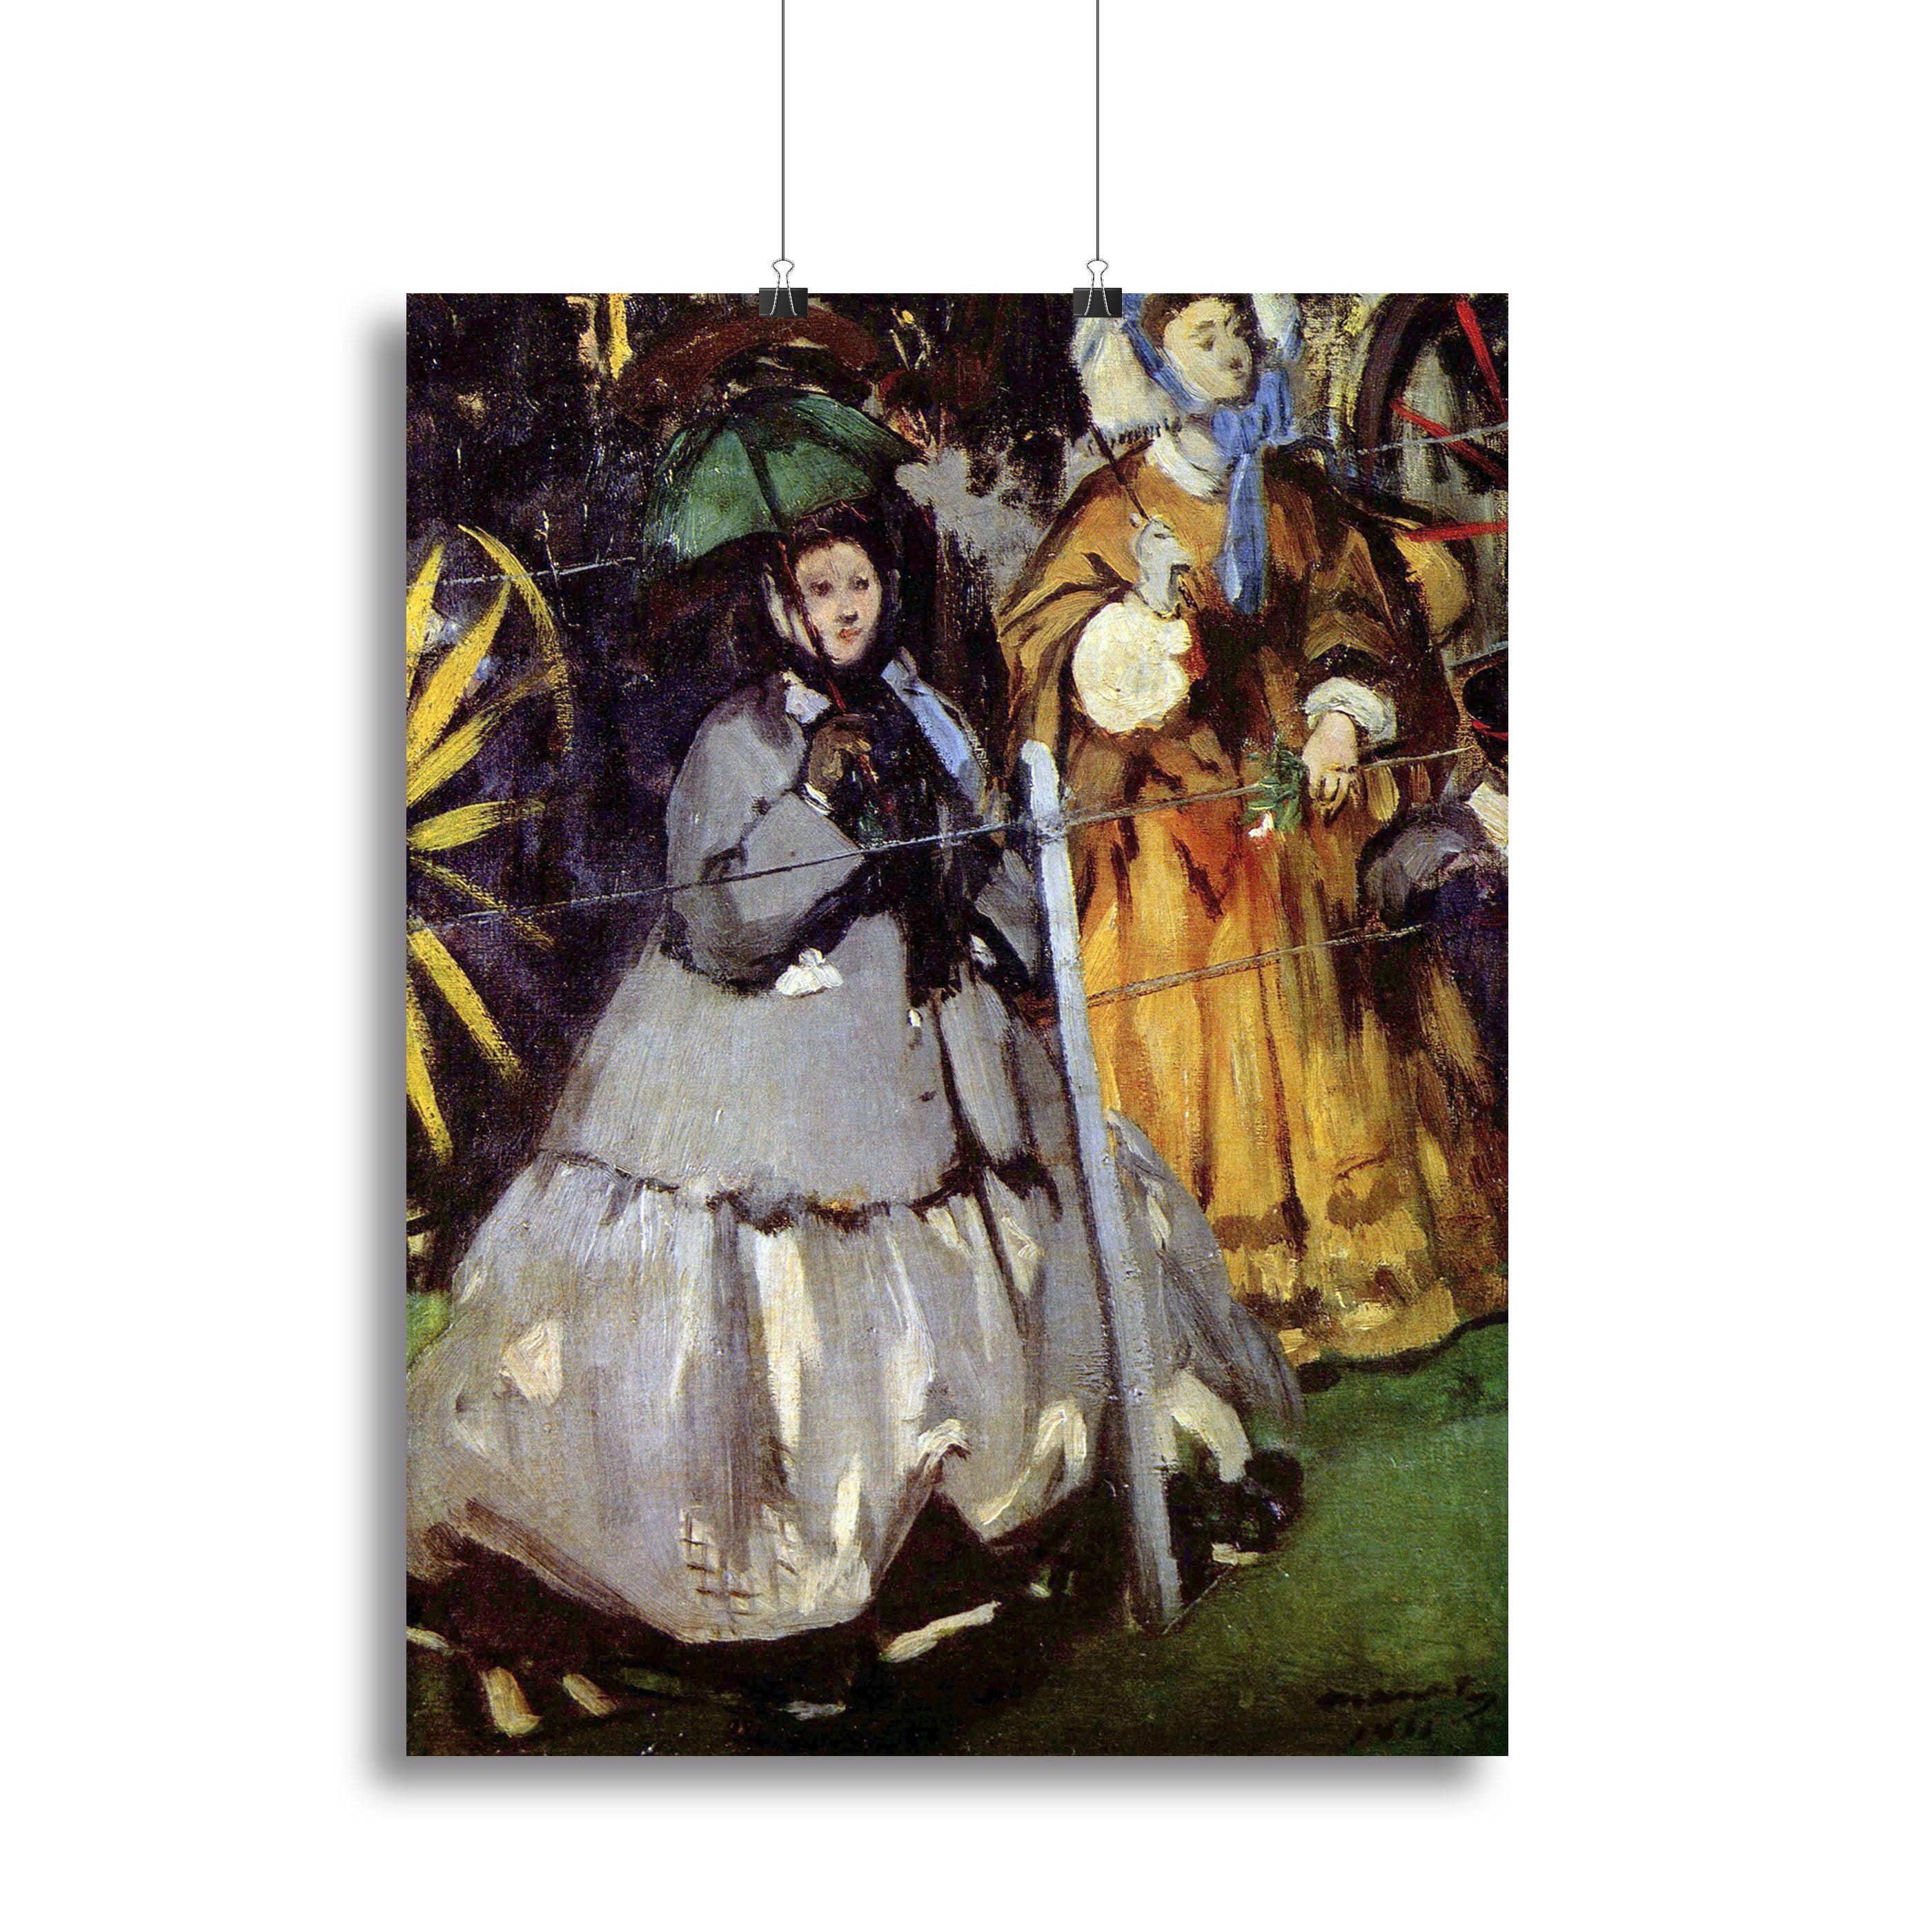 Spectators at the races by Manet Canvas Print or Poster